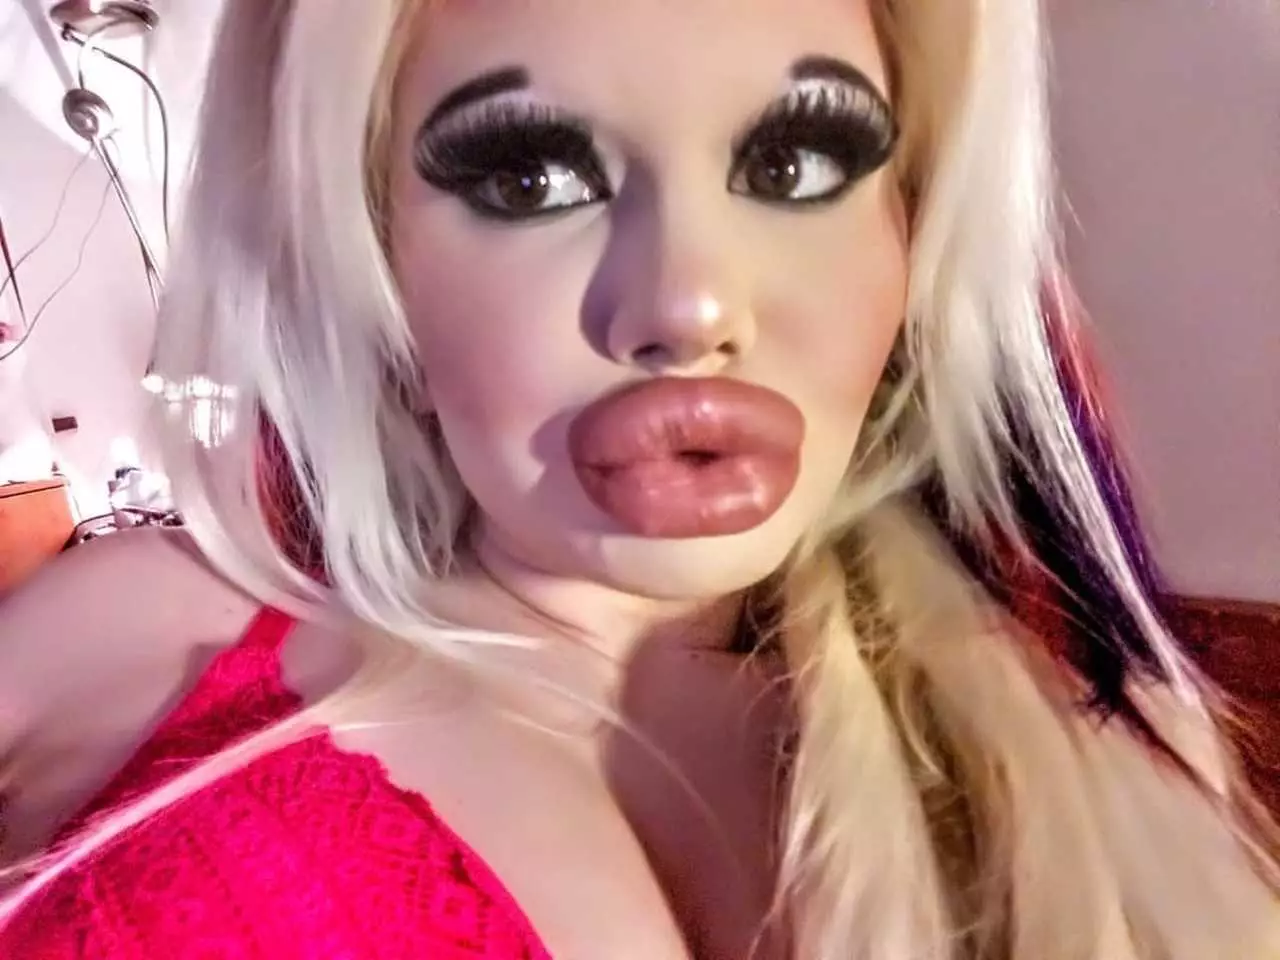 Andrea Ivanova says she has had at least 15 operations in a year in an attempt to look like a Barbie doll.